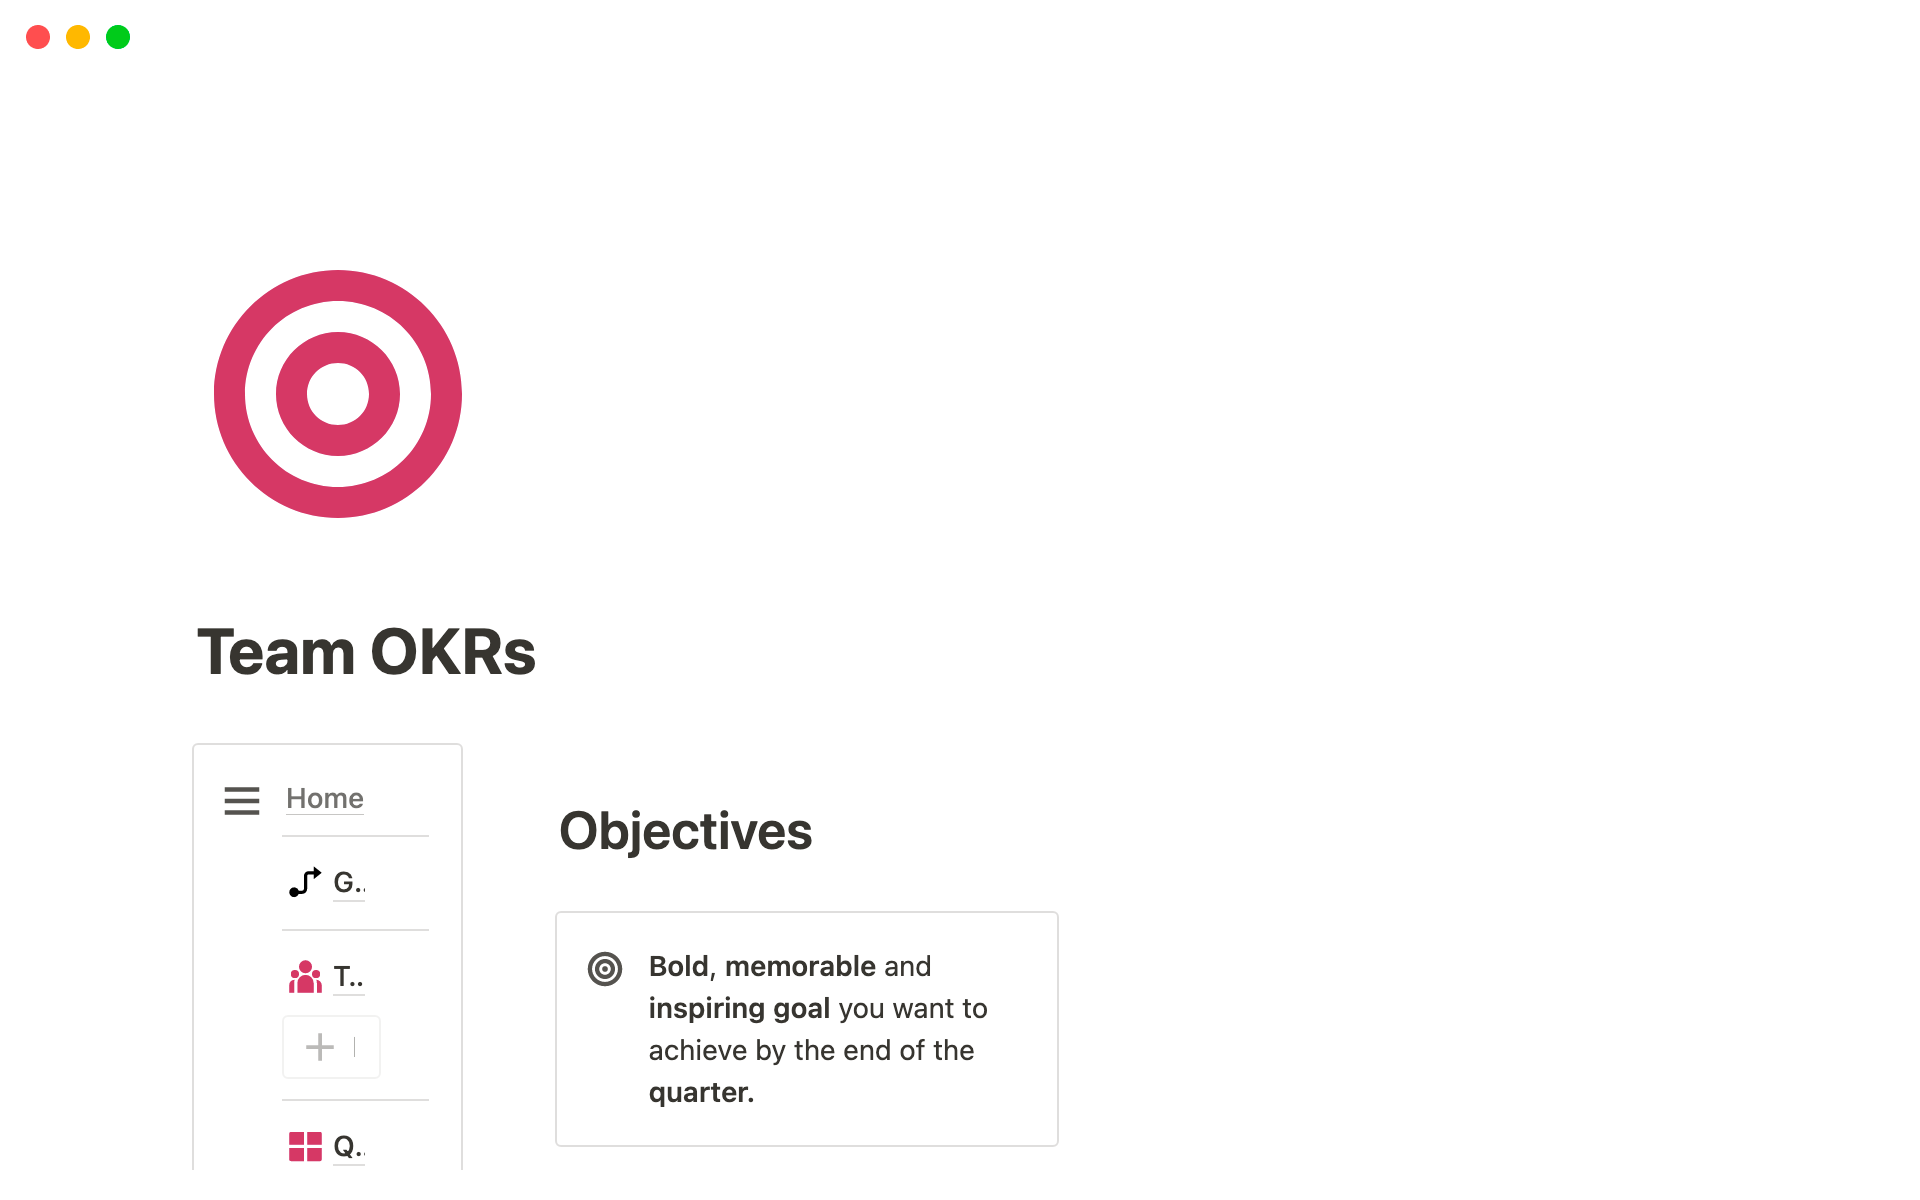 The OKR Notion dashboard helps set teams' goals and align everyone towards the same Objectives and Key Results.